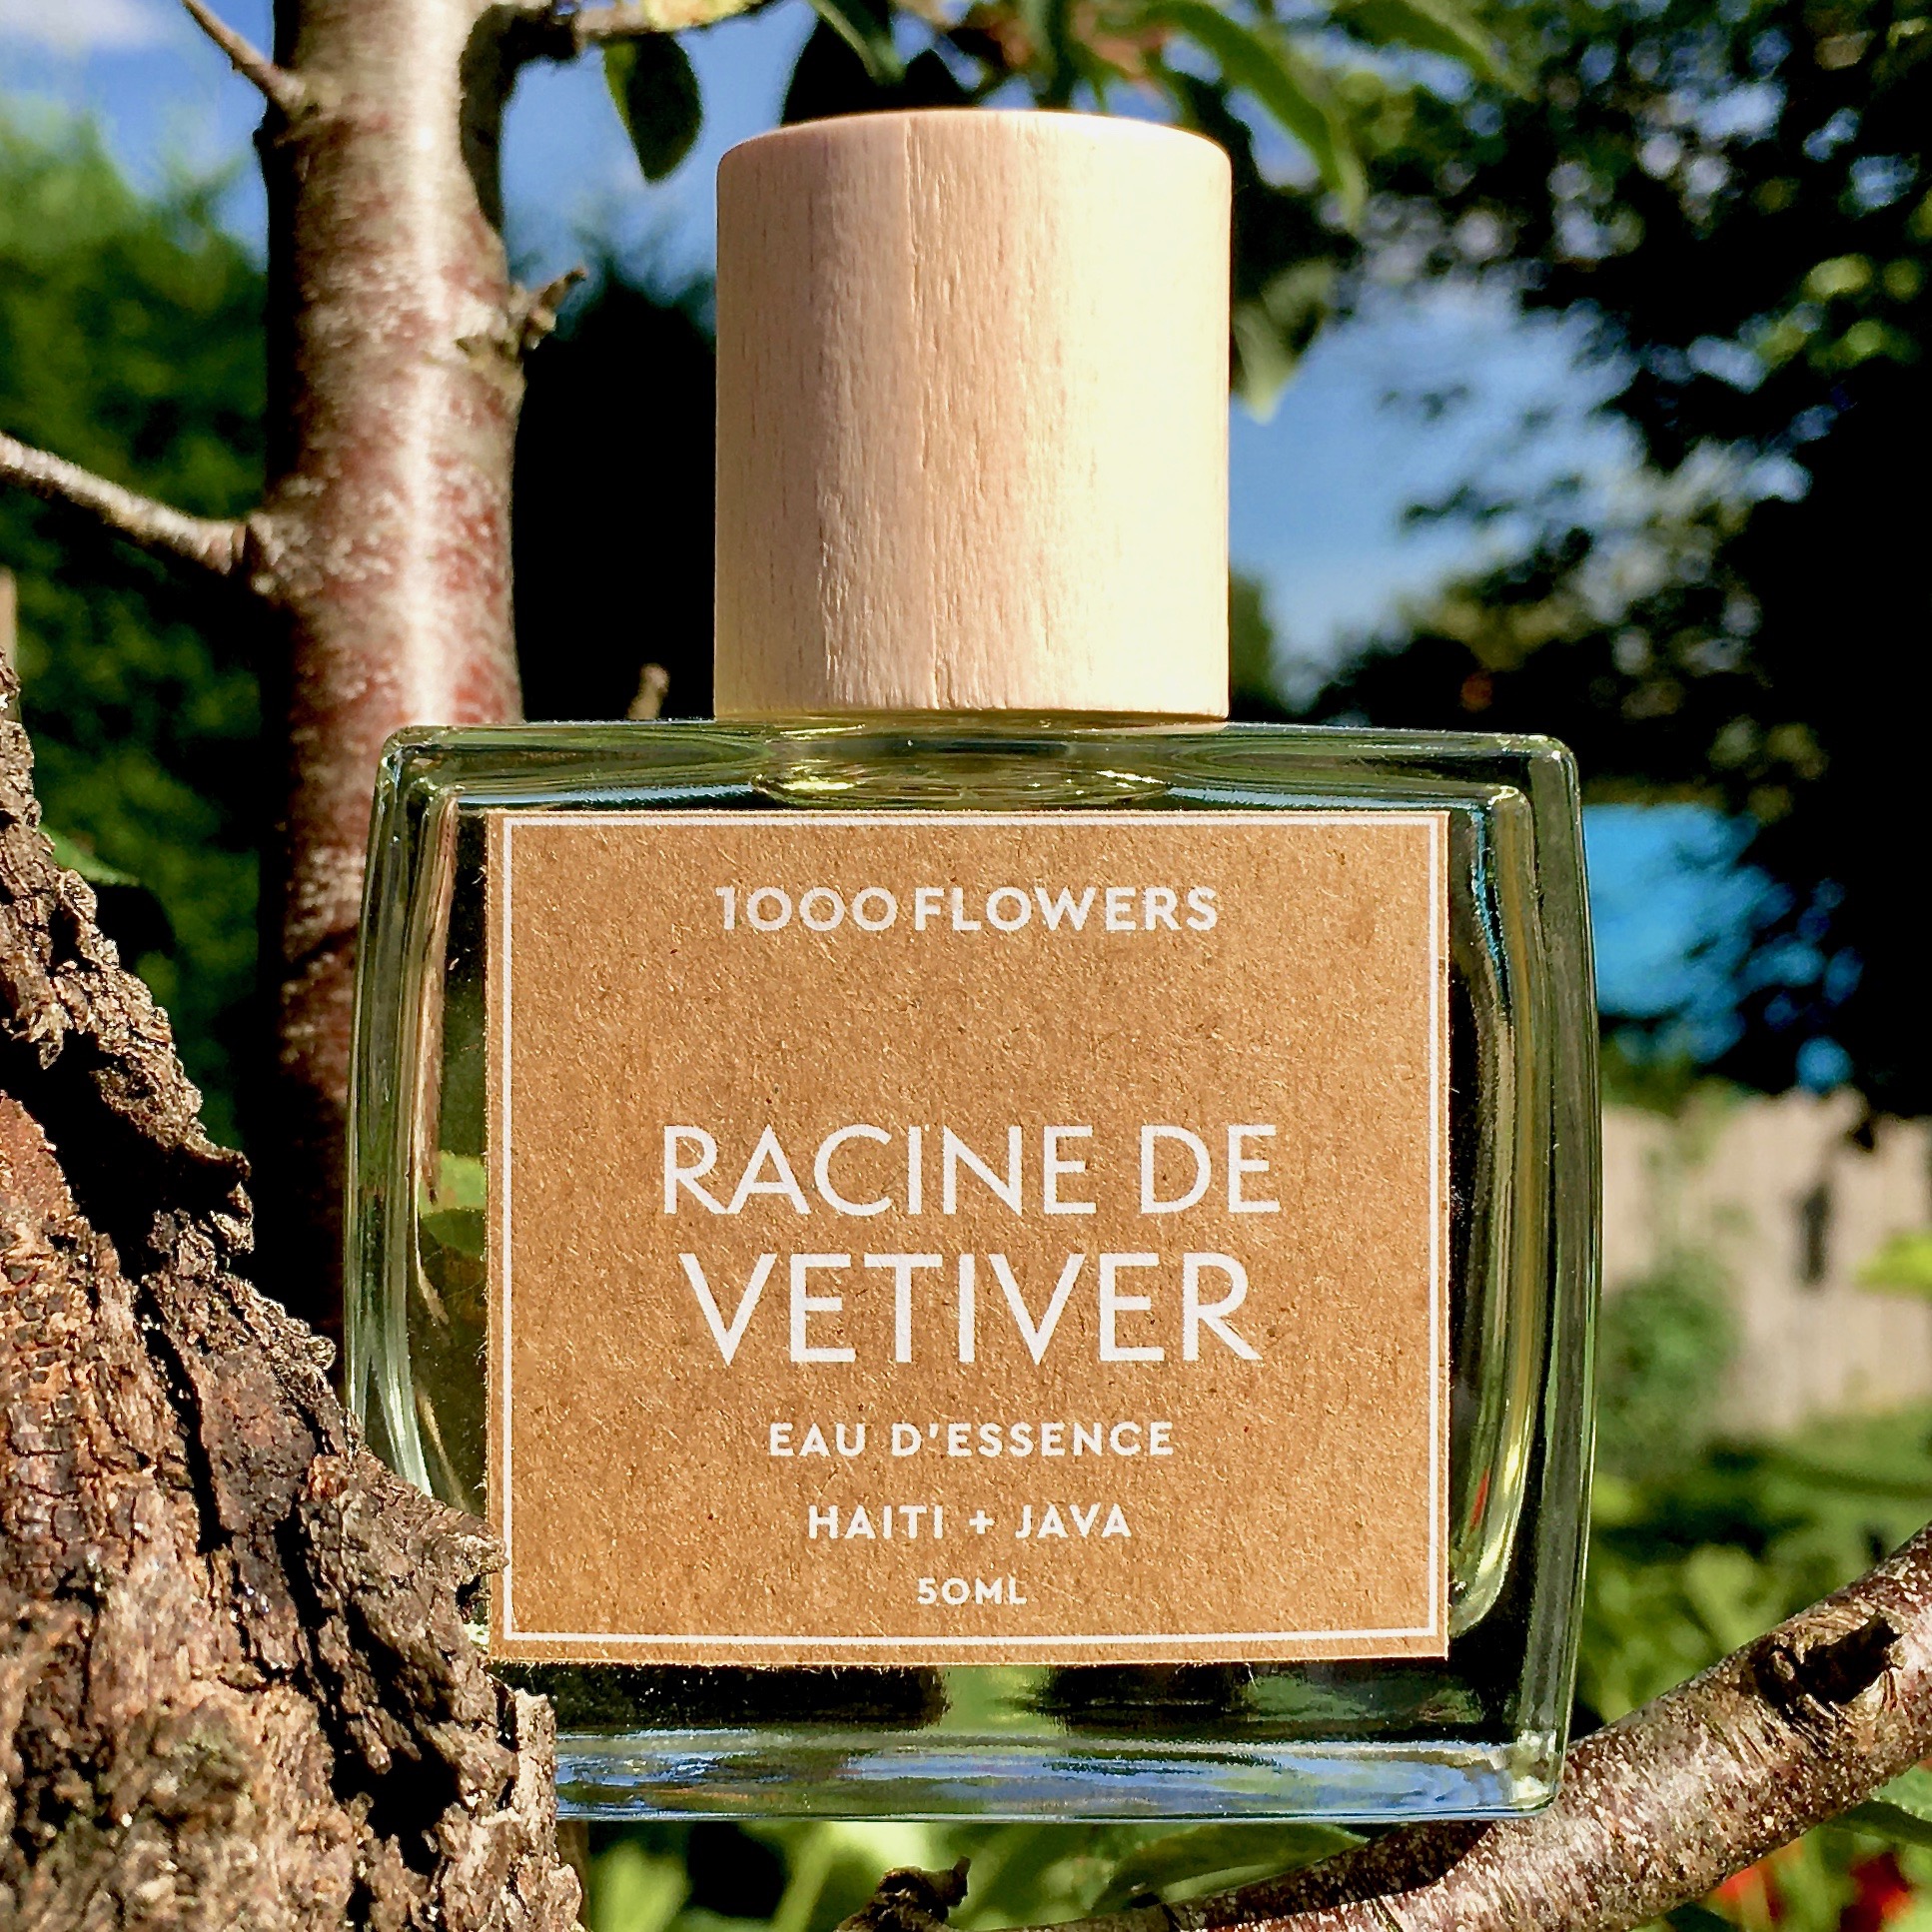 Racine de Vetiver by 1000 Flowers » Reviews & Perfume Facts